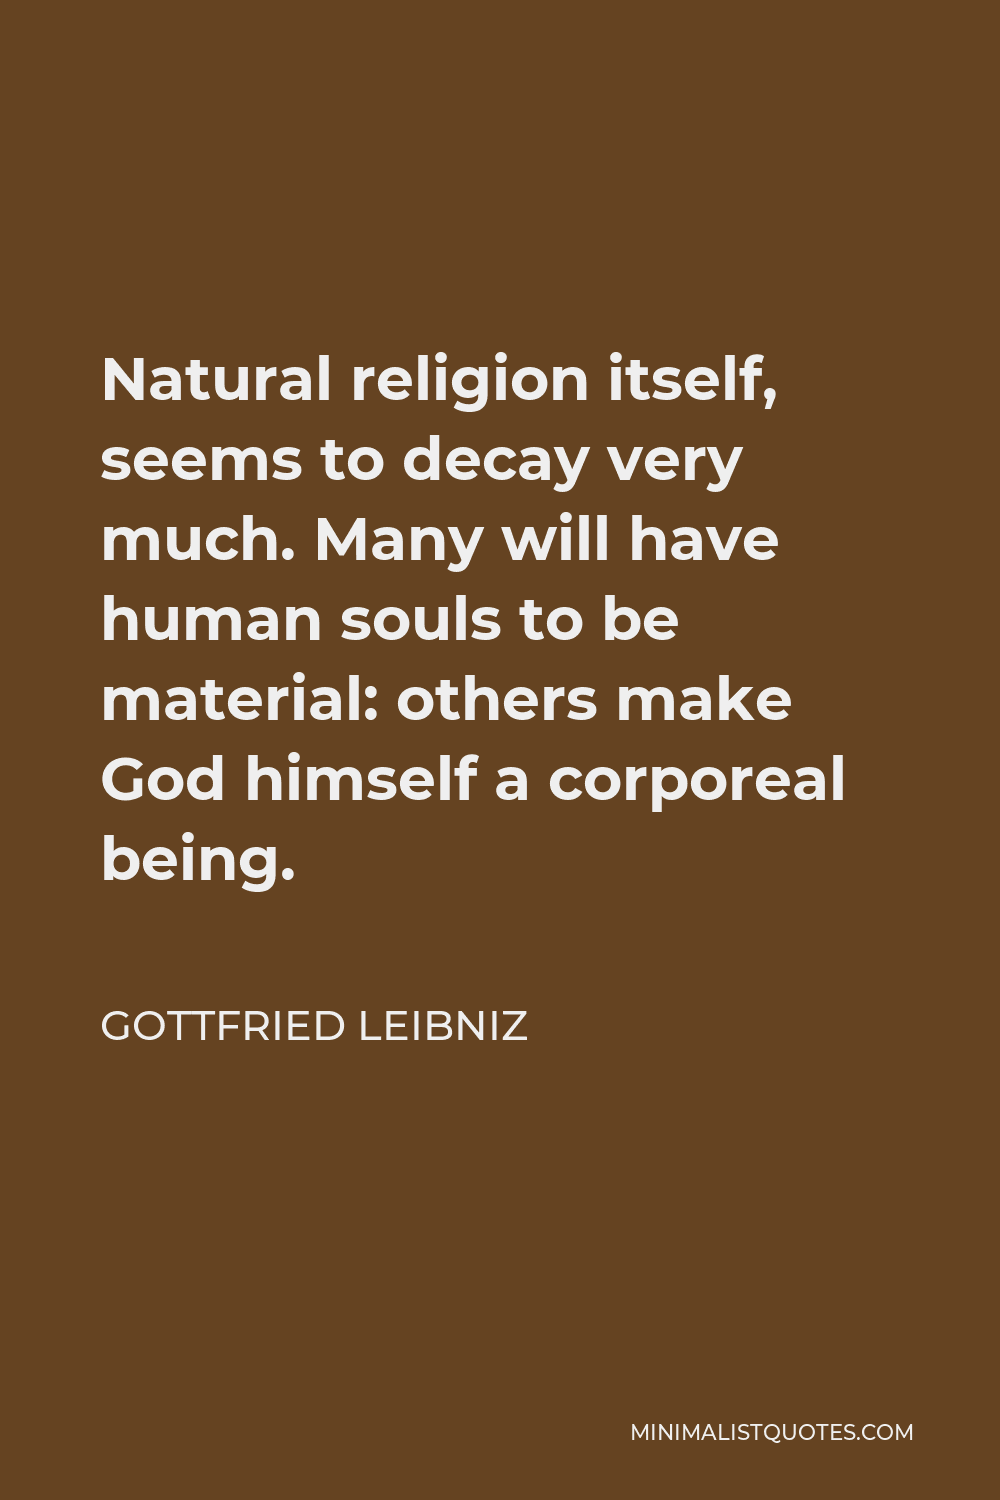 Gottfried Wilhelm Leibniz Quote - Natural religion itself, seems to decay very much. Many will have human souls to be material: others make God himself a corporeal being.